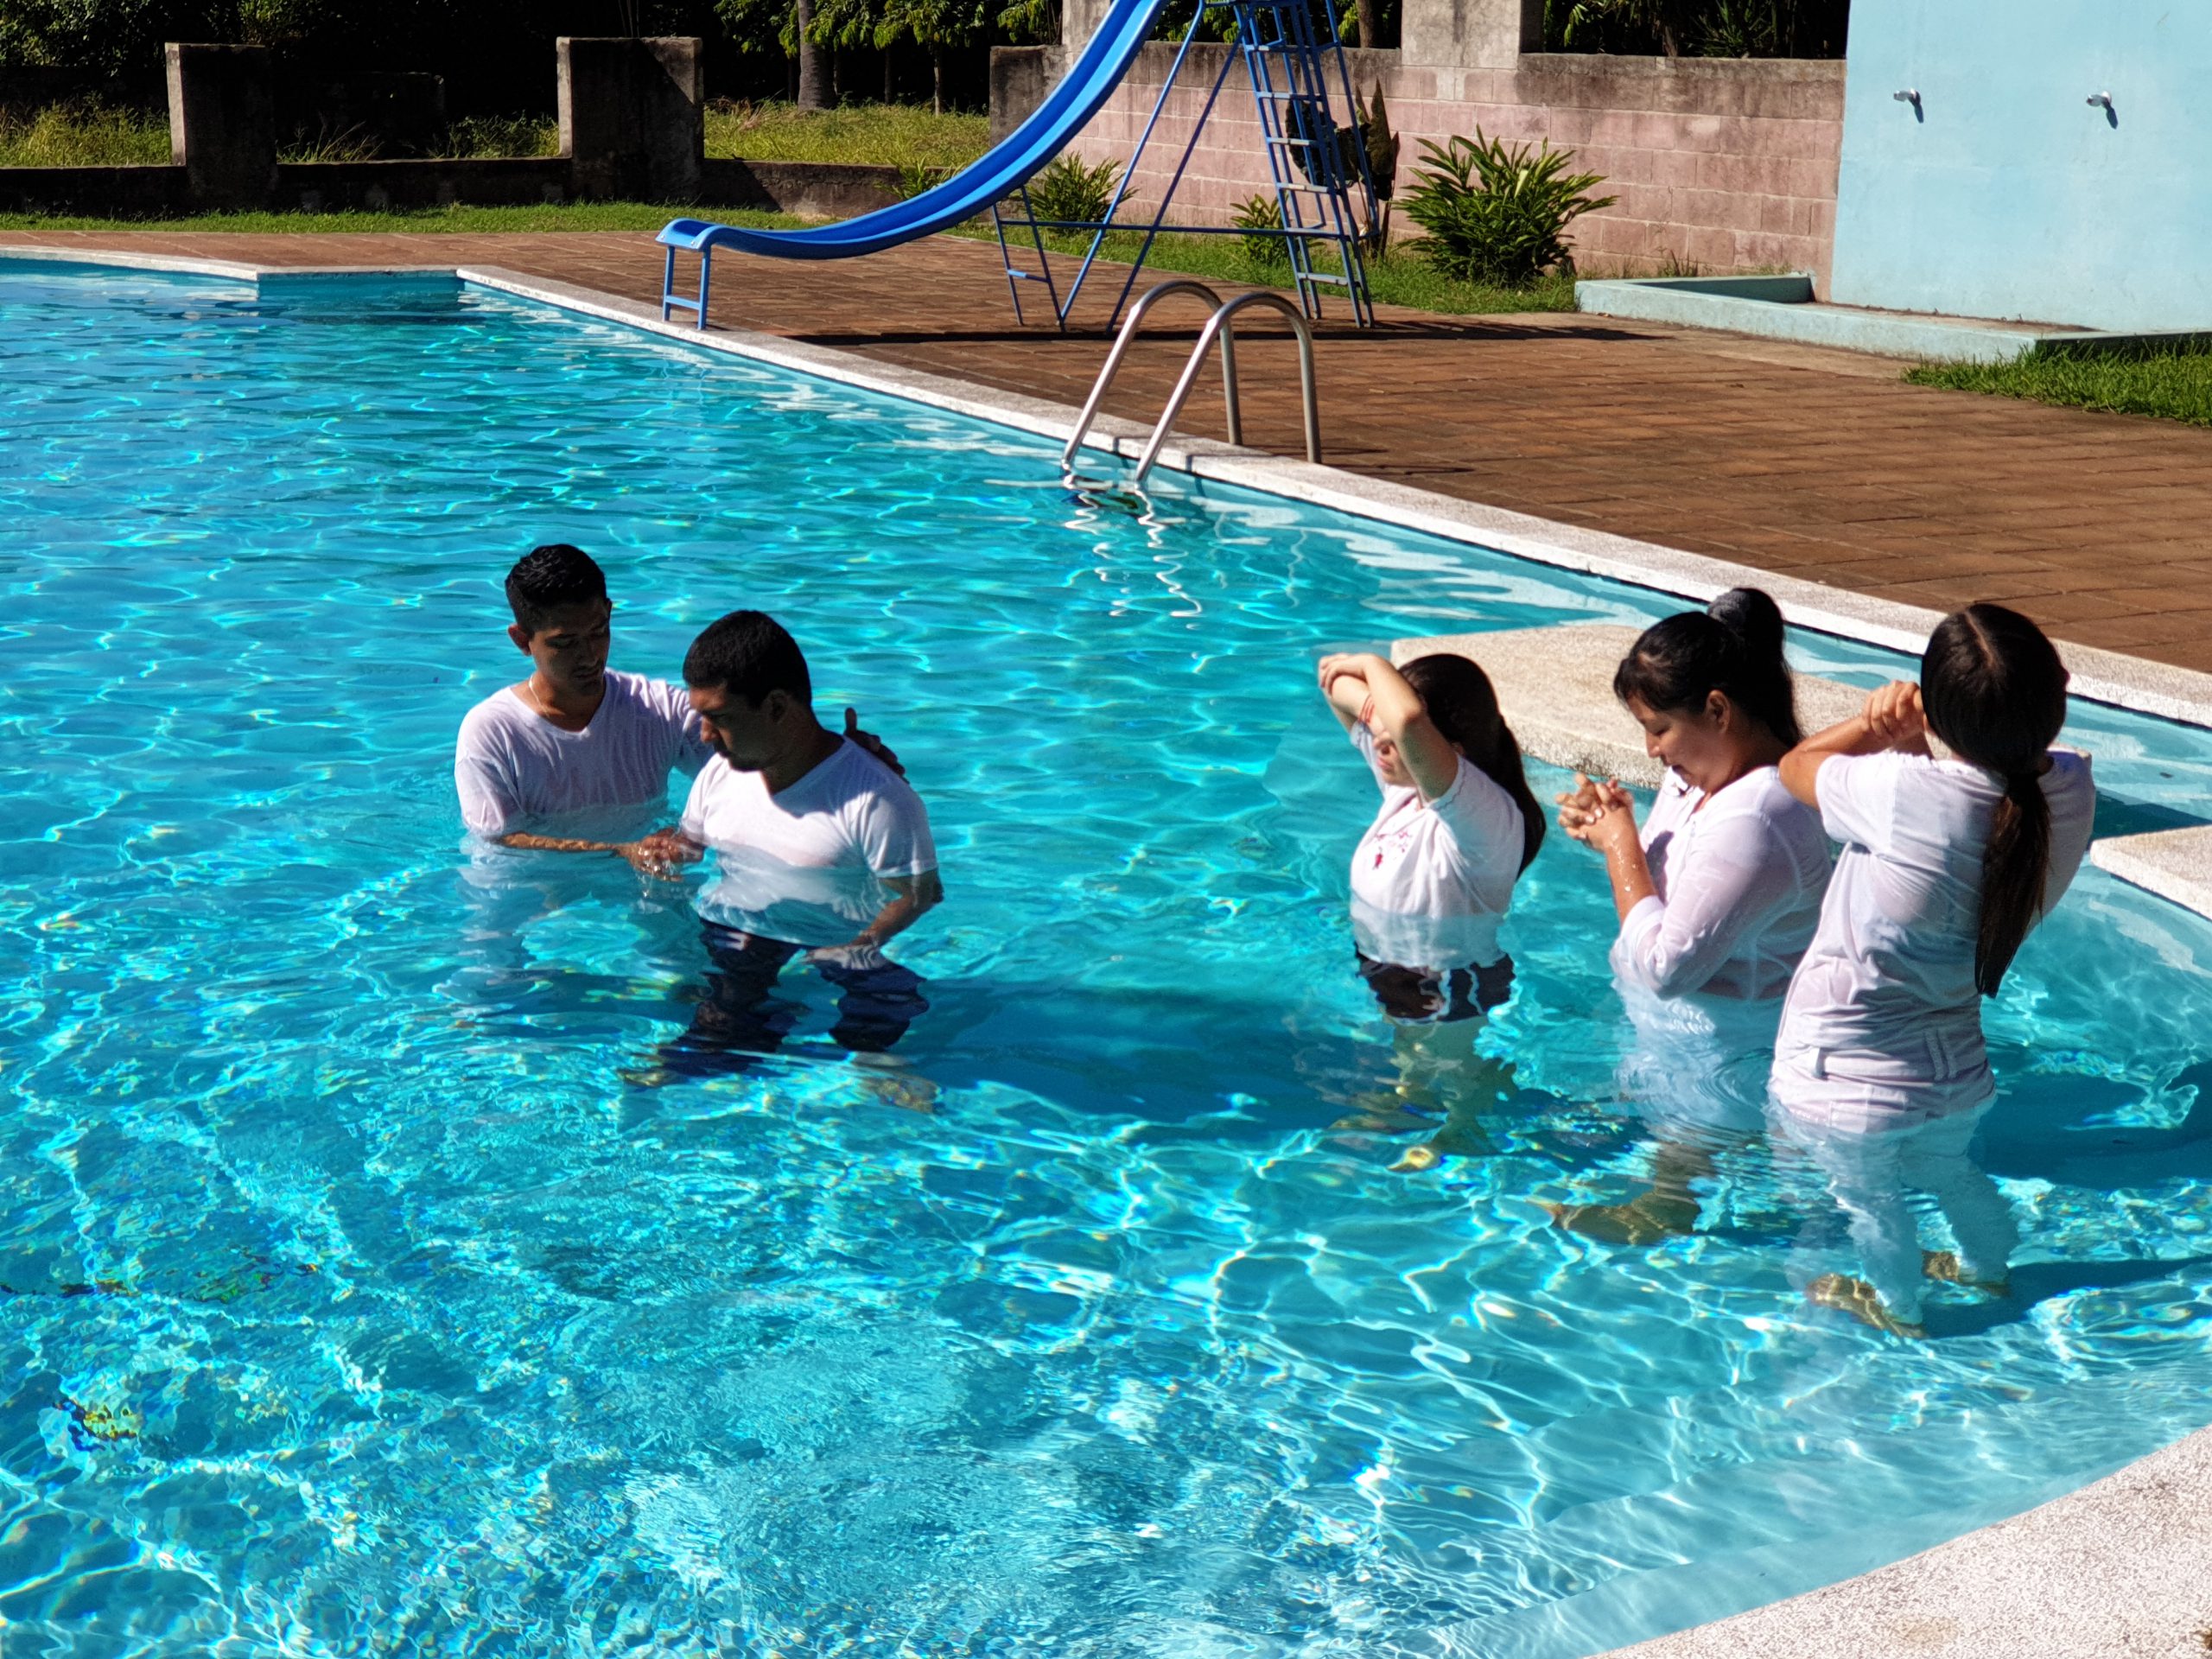 Baptism in a pool